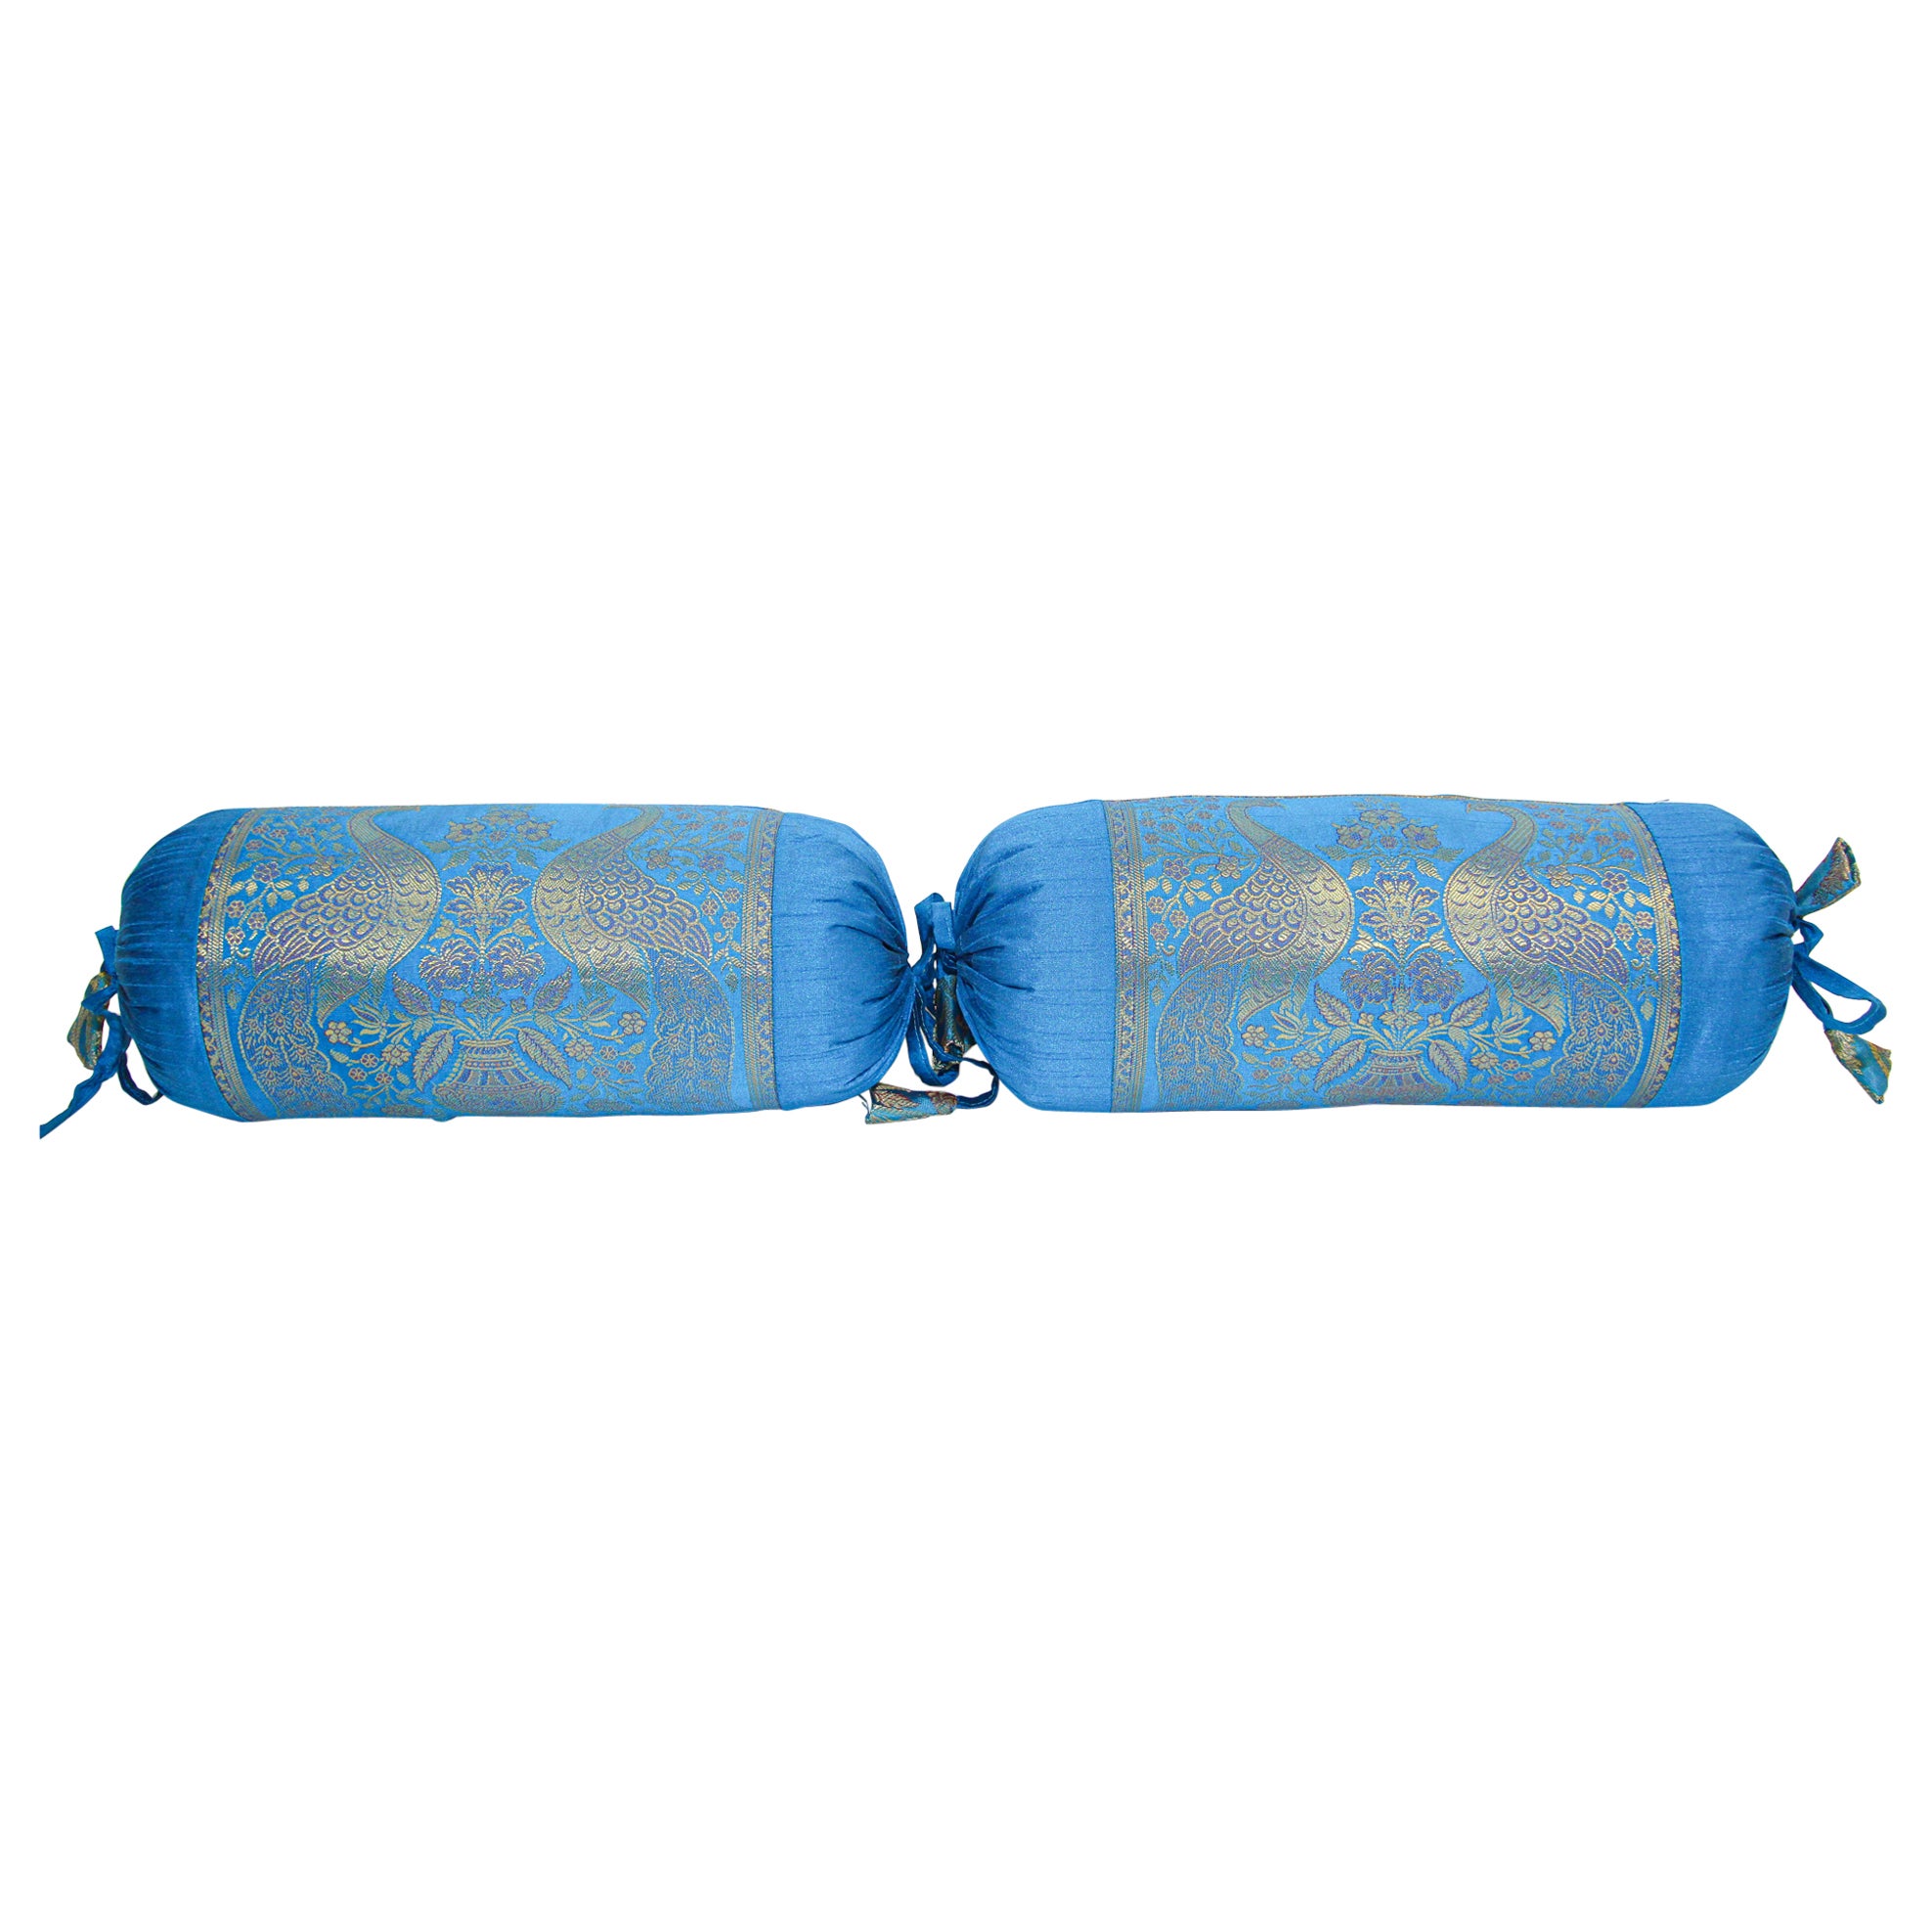 Vintage Brocade Silk Bolster Pillows Turquoise Blue and Gold Colors with Peacock